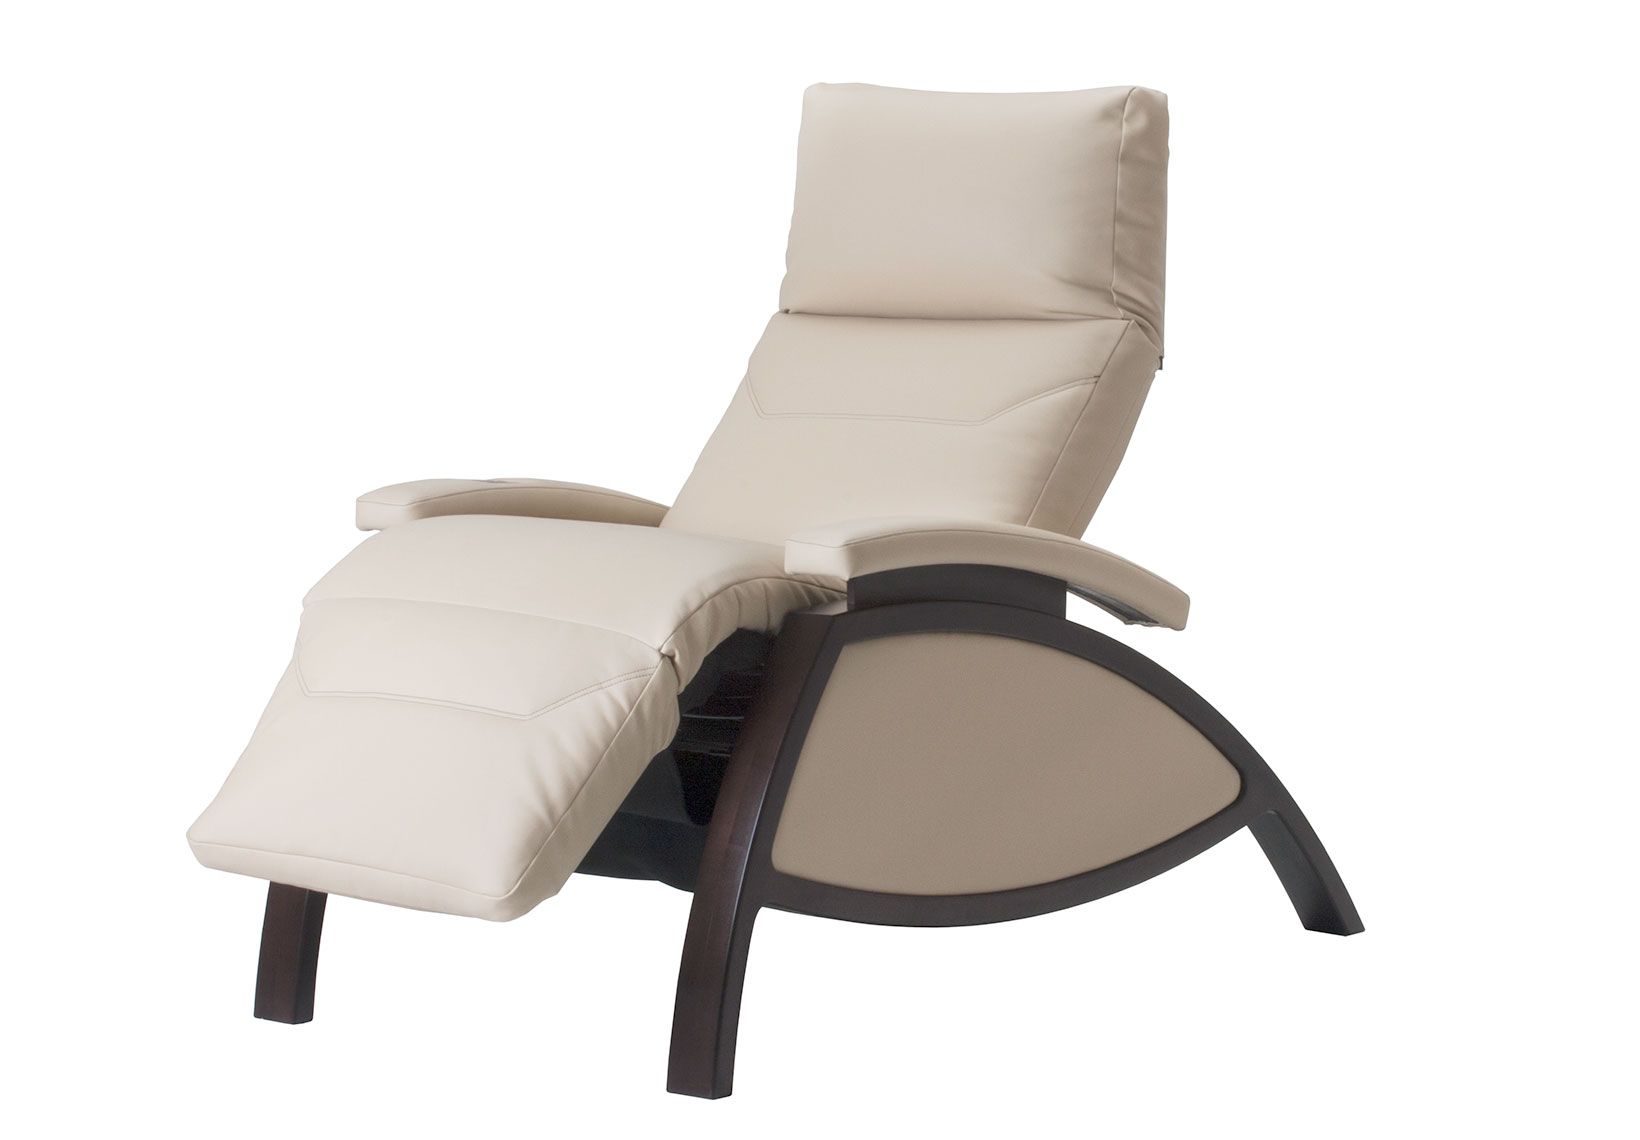 ZG Wellness Lounger (with Relaxor)